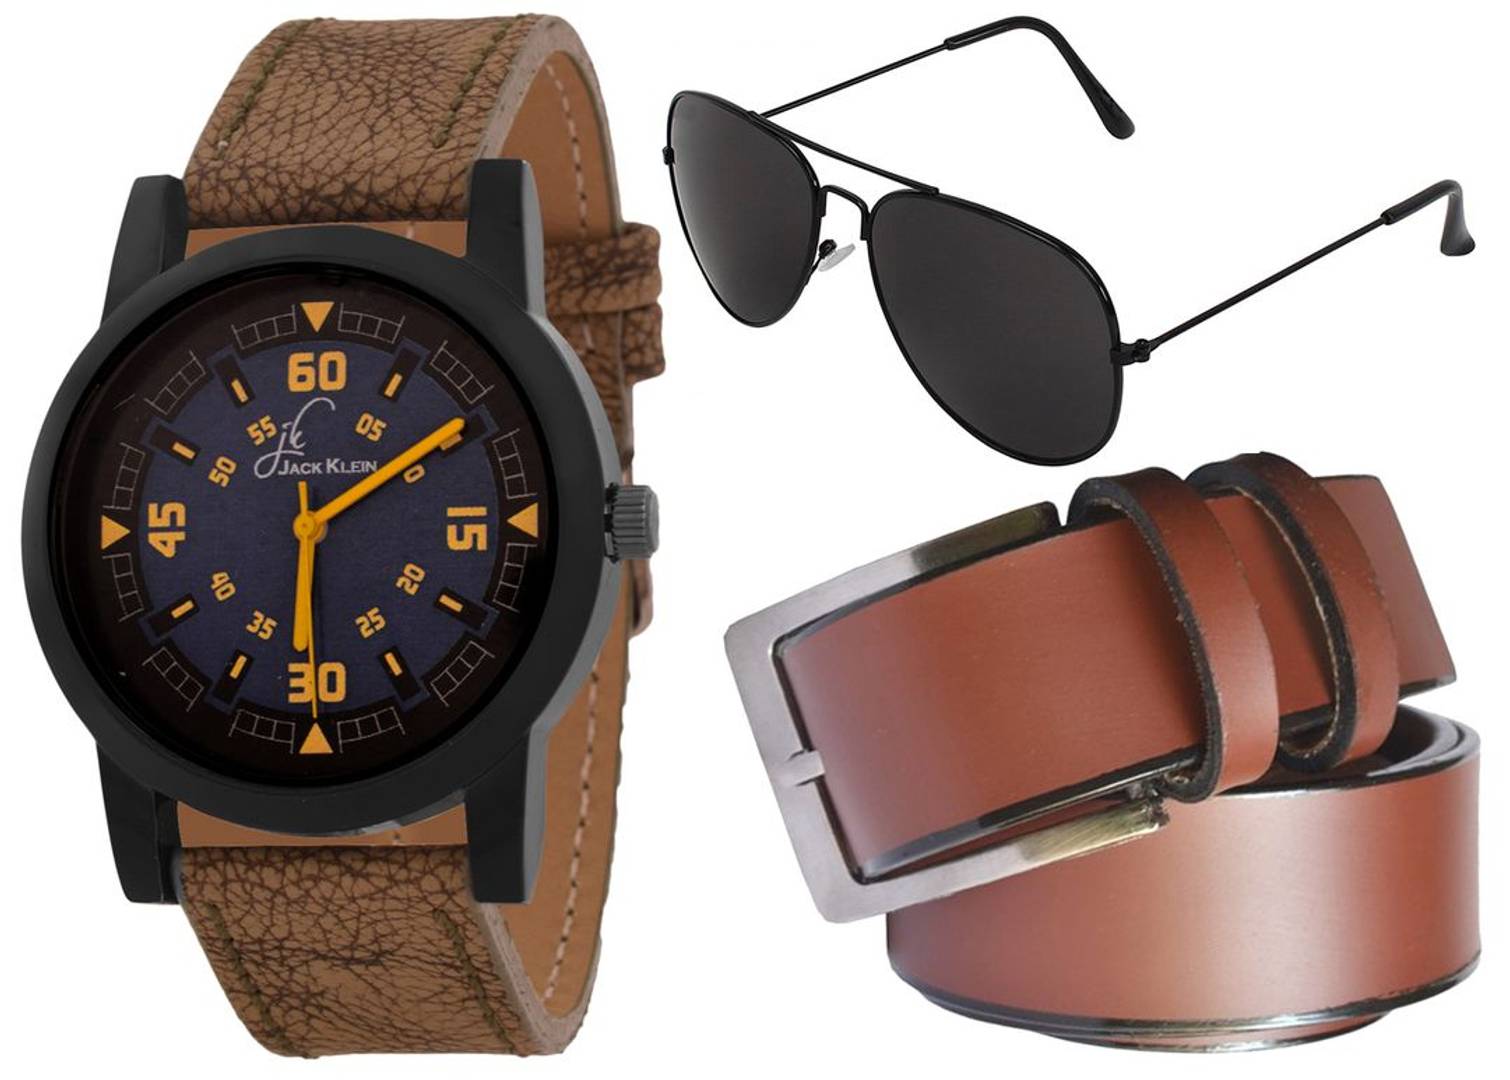 High Quality Stylish And Funky Wrist Watch With  Belt And Aviator Glasses